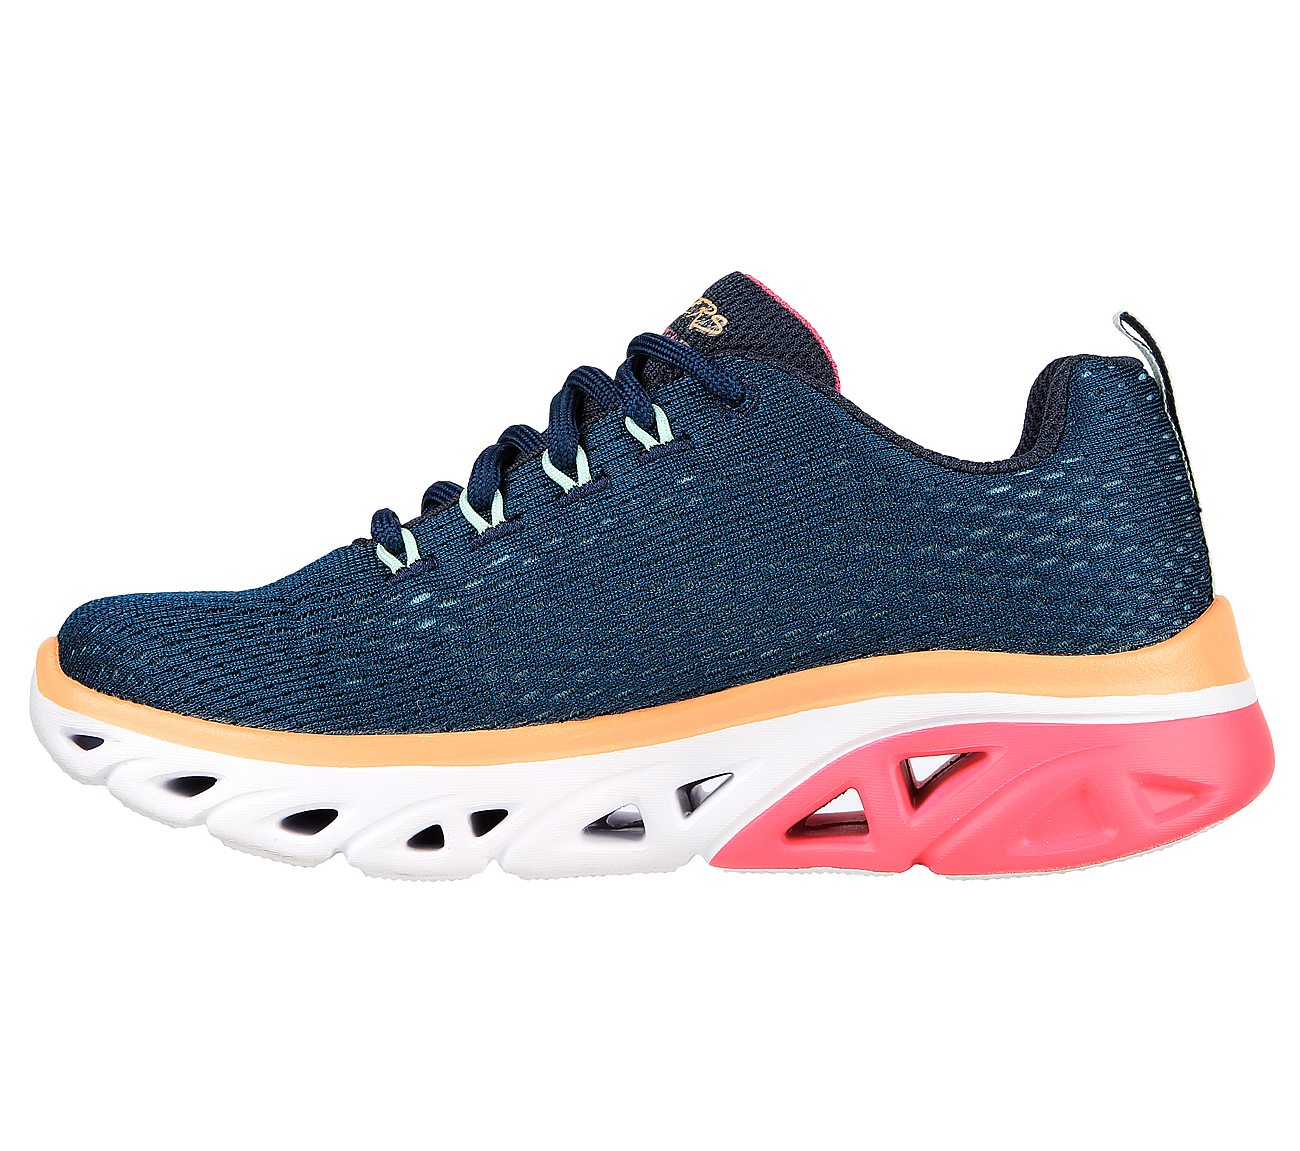 GLIDE-STEP SPORT - WAVE HEAT, Navy image number null